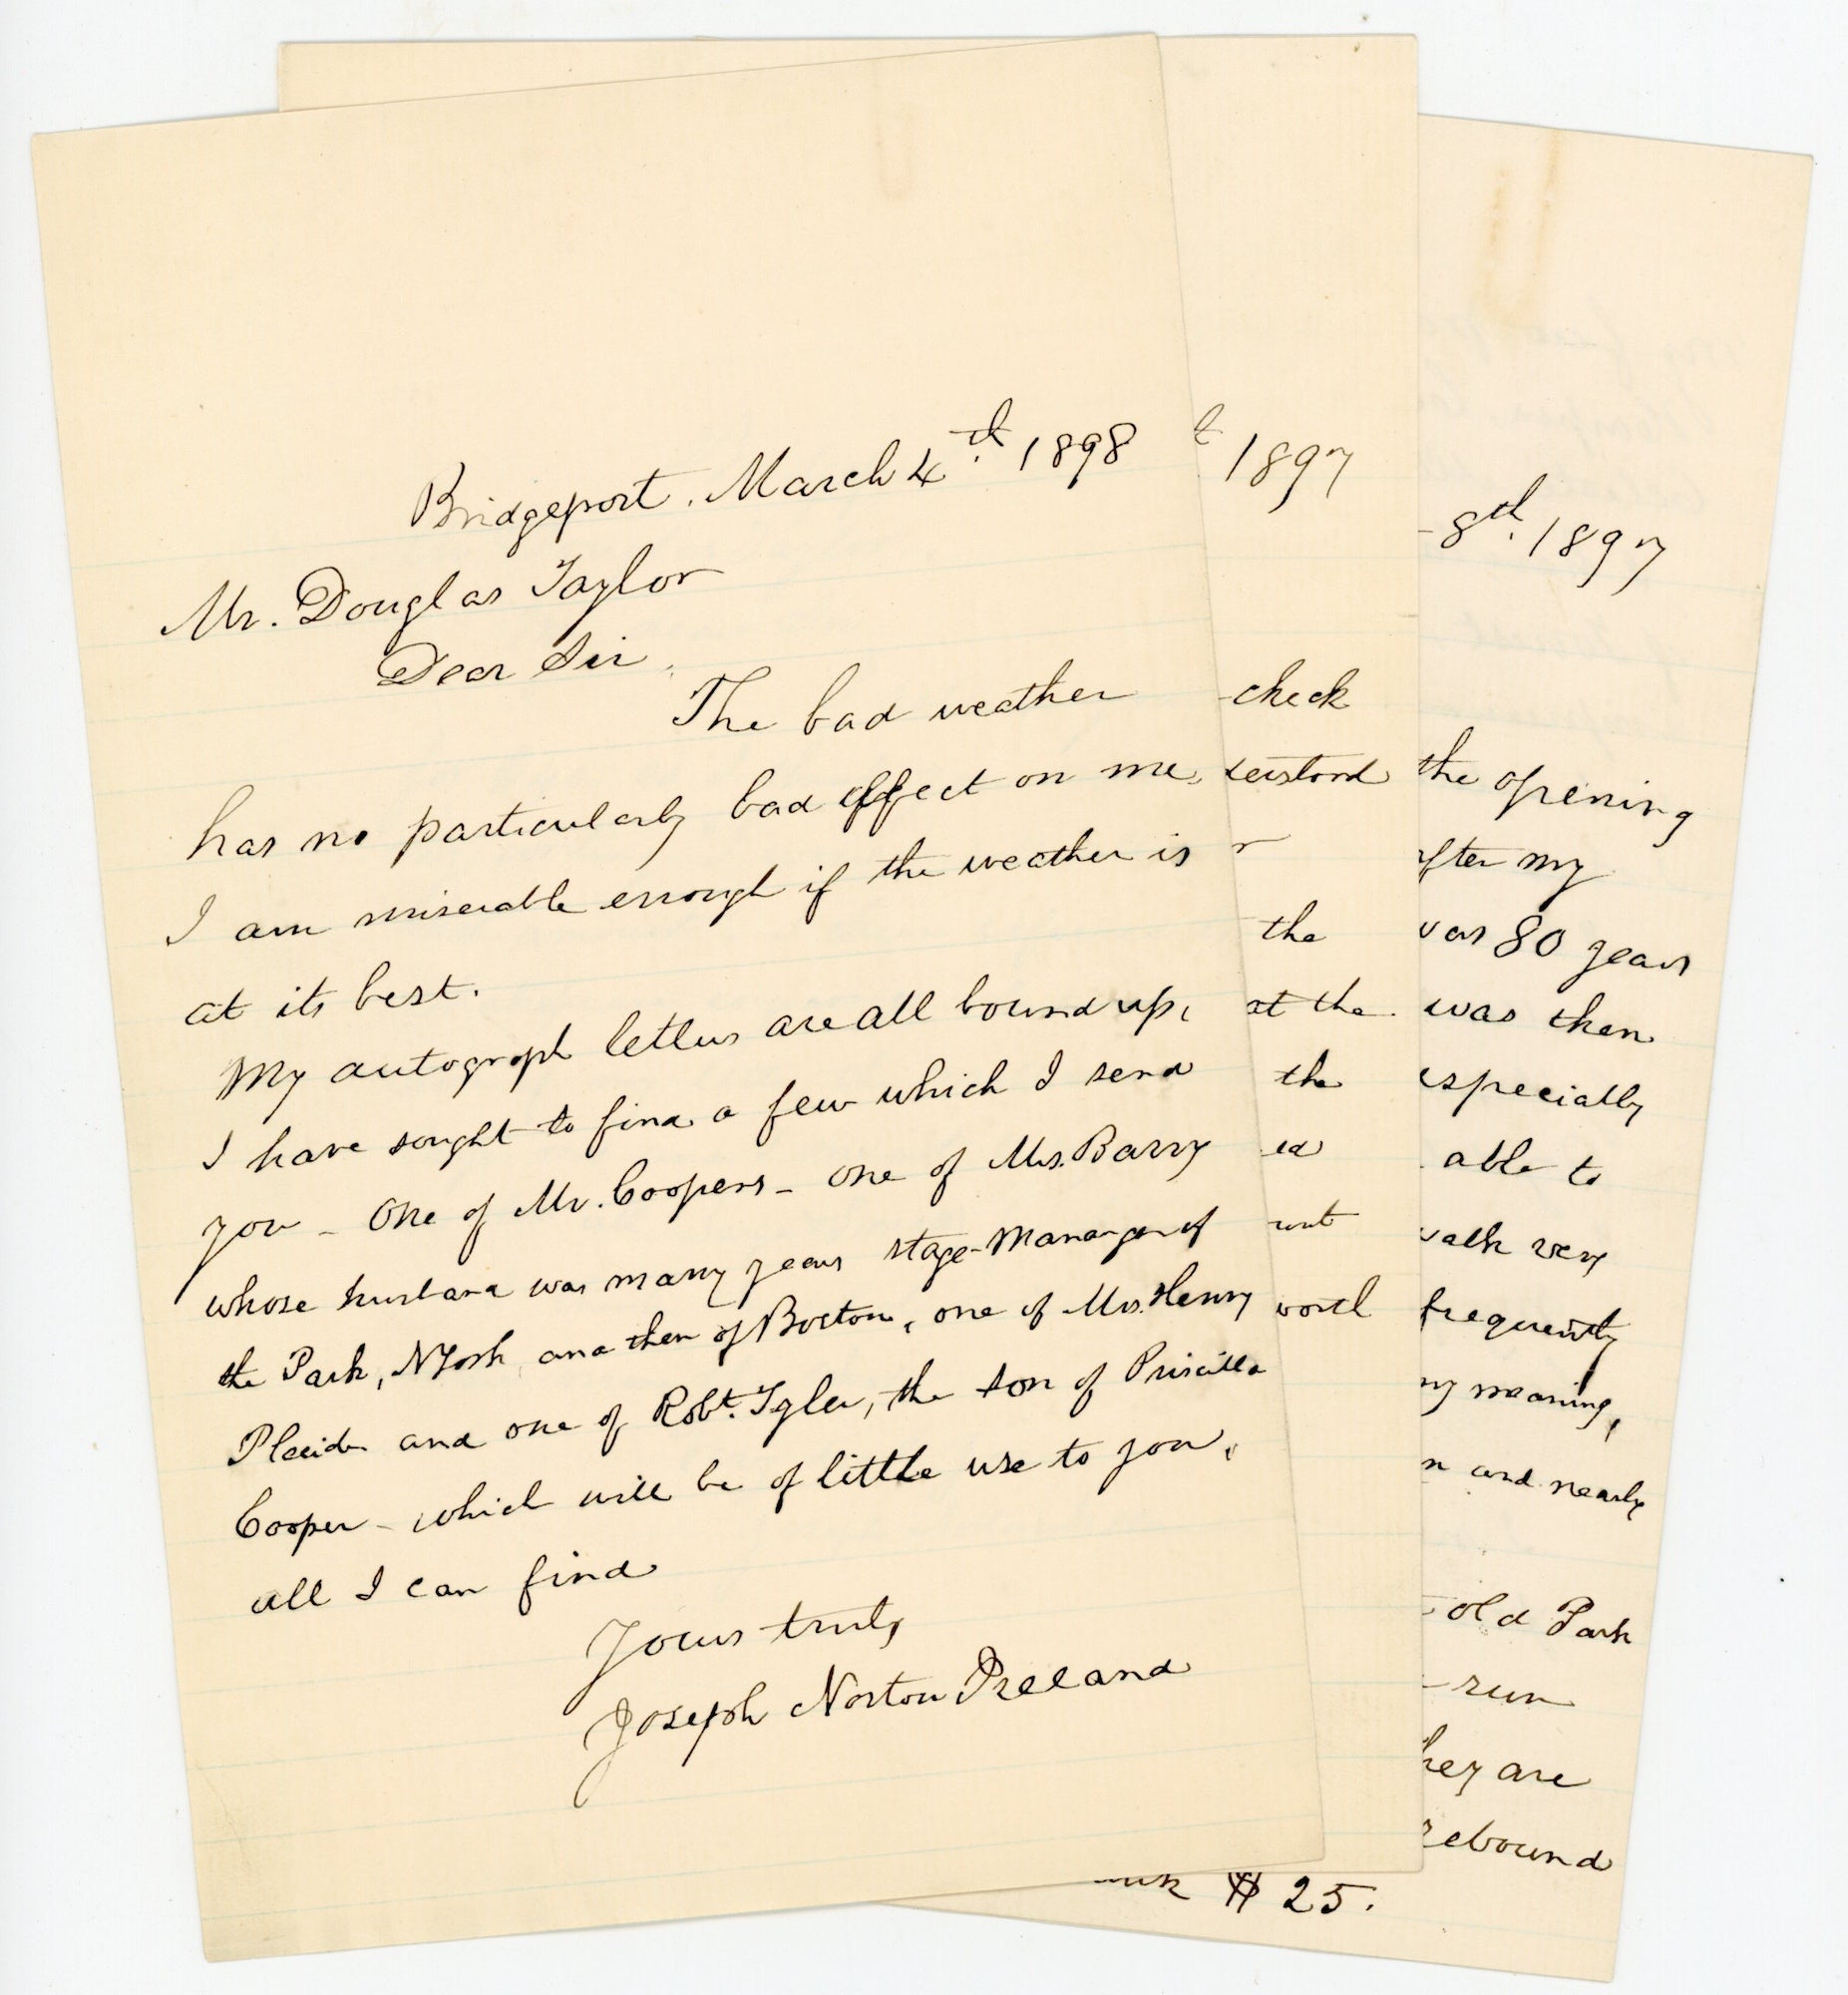 [Theater. Collecting] Ireland, Joseph Norton - [Small Archive] Three Letters from Joseph Norton Ireland, Offering to Sell His Collection to Fellow Theater Historian, Douglas Taylor